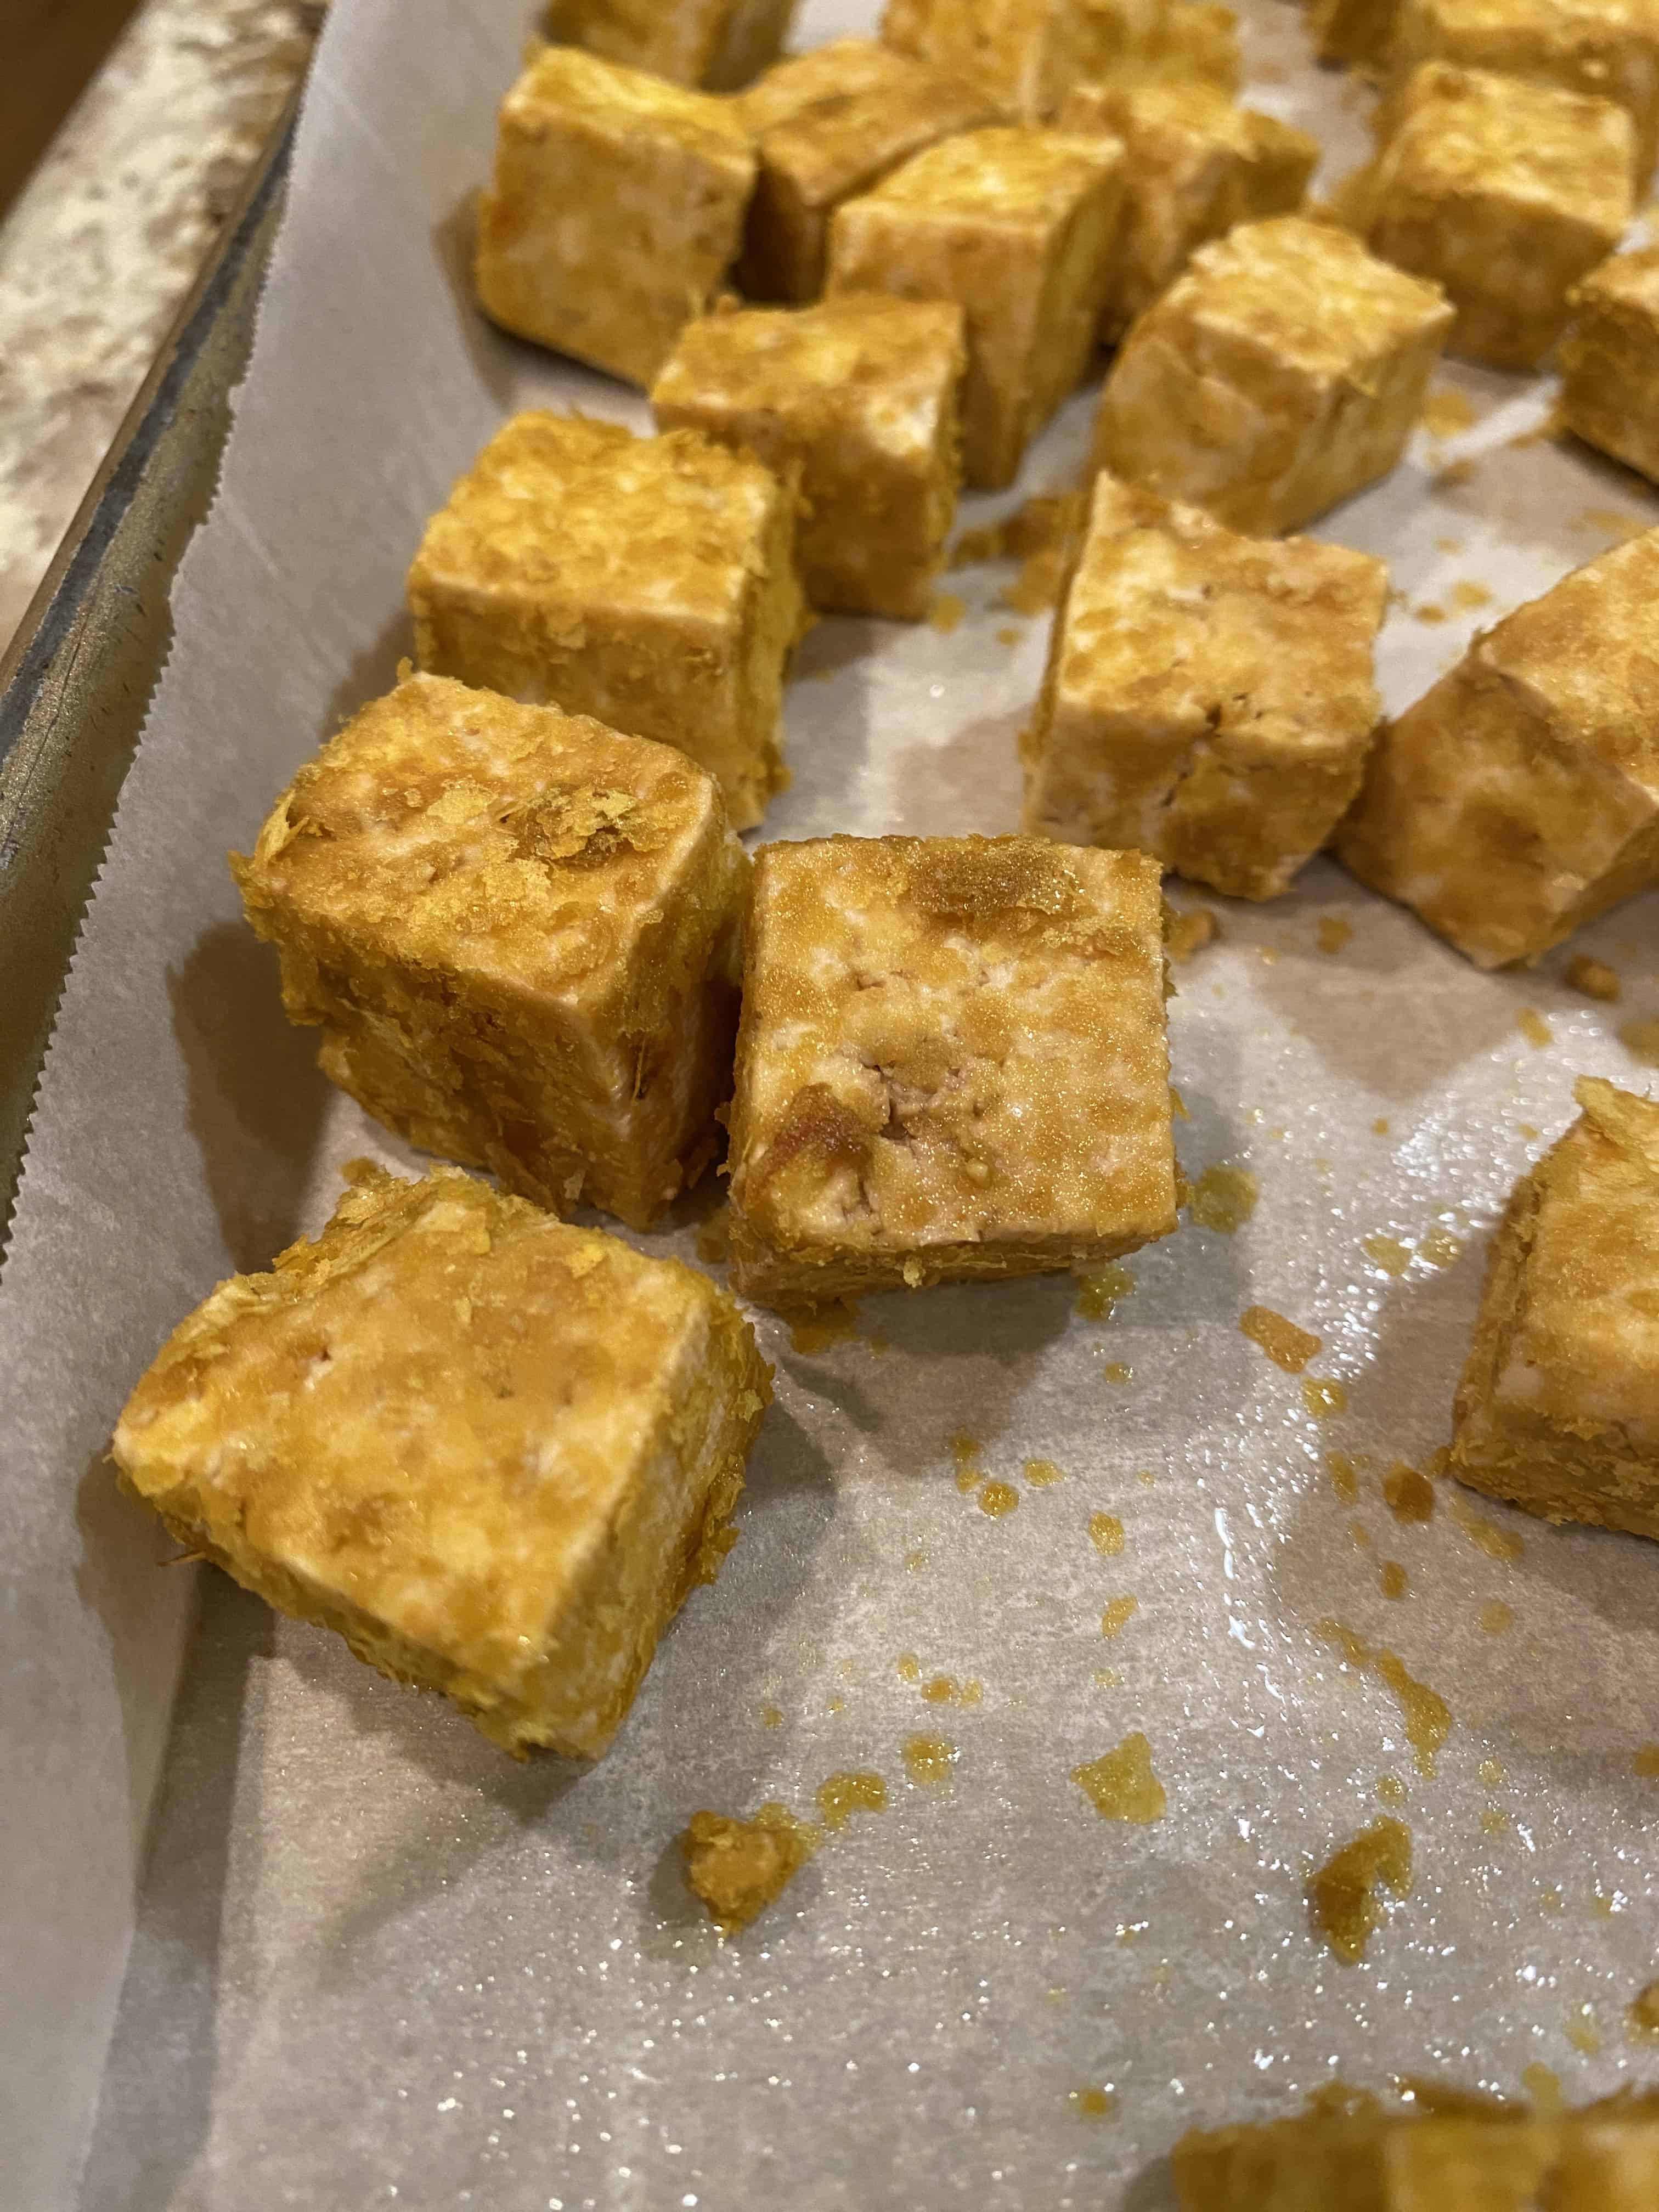 Diced tofu chunks with breading spread out on a piece of parchment paper on a baking sheet.